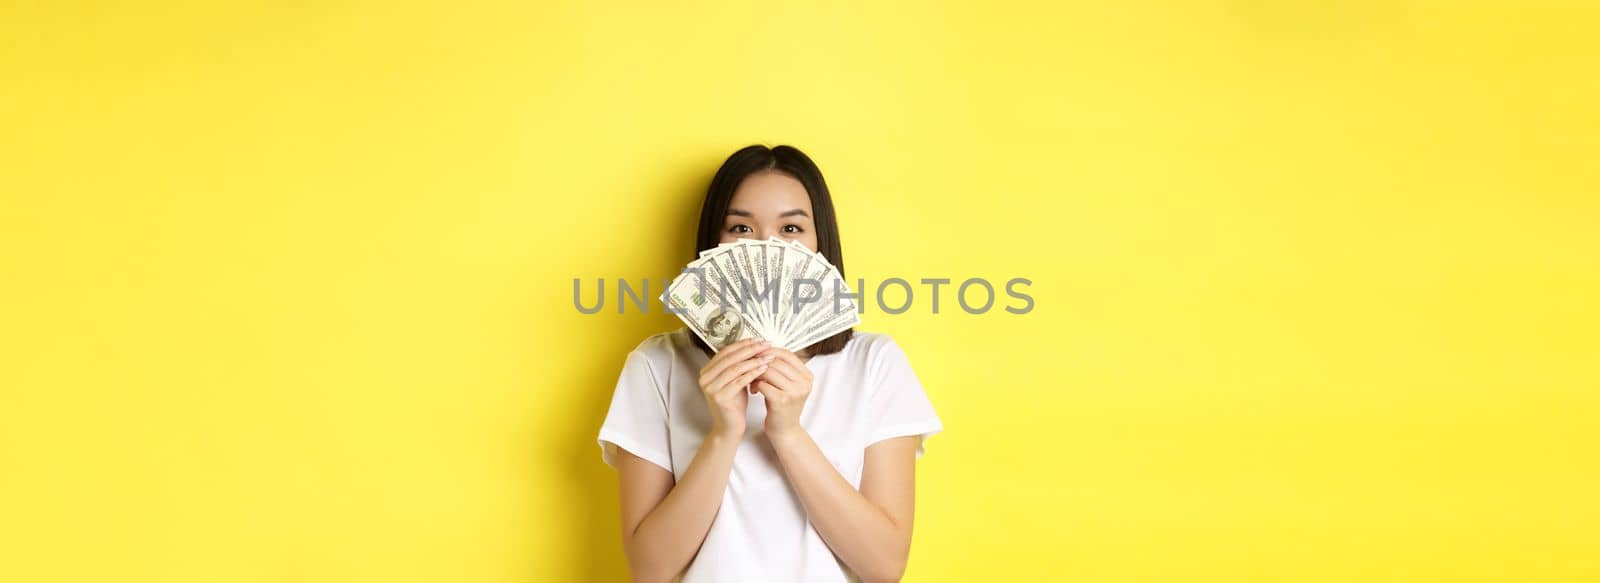 Cute asian woman hiding face behind money, peeking at camera satisfied, earn cash, standing over yellow background.